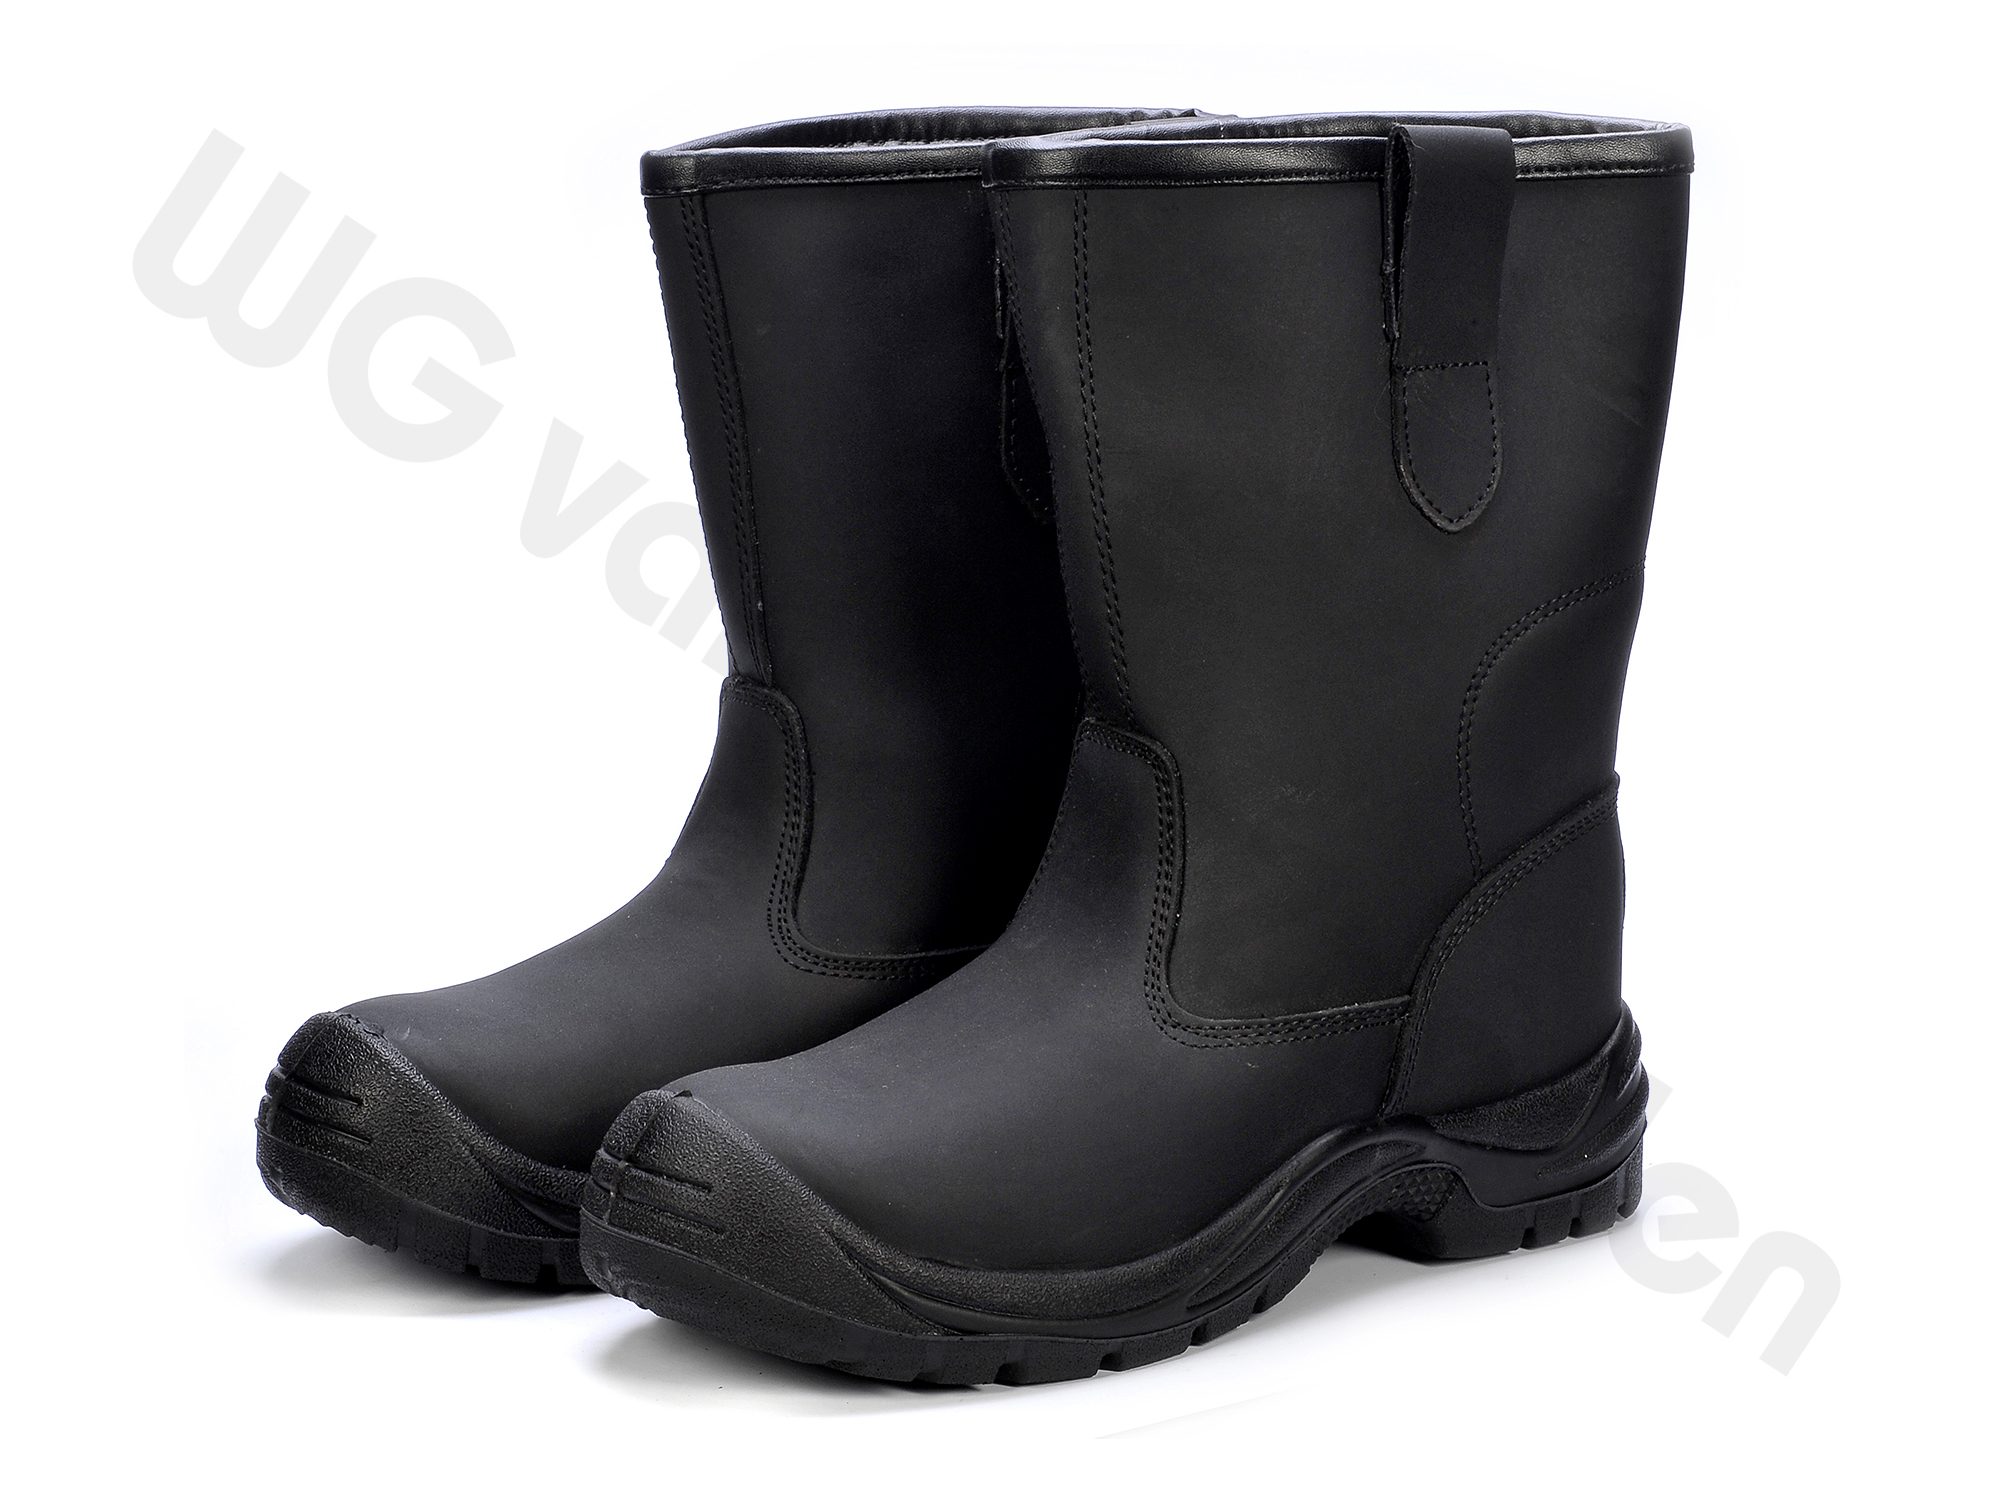 880350 BOOTS SAFETY S3 LEATHER W/STEEL TOE AND LINING 39/25.5CM